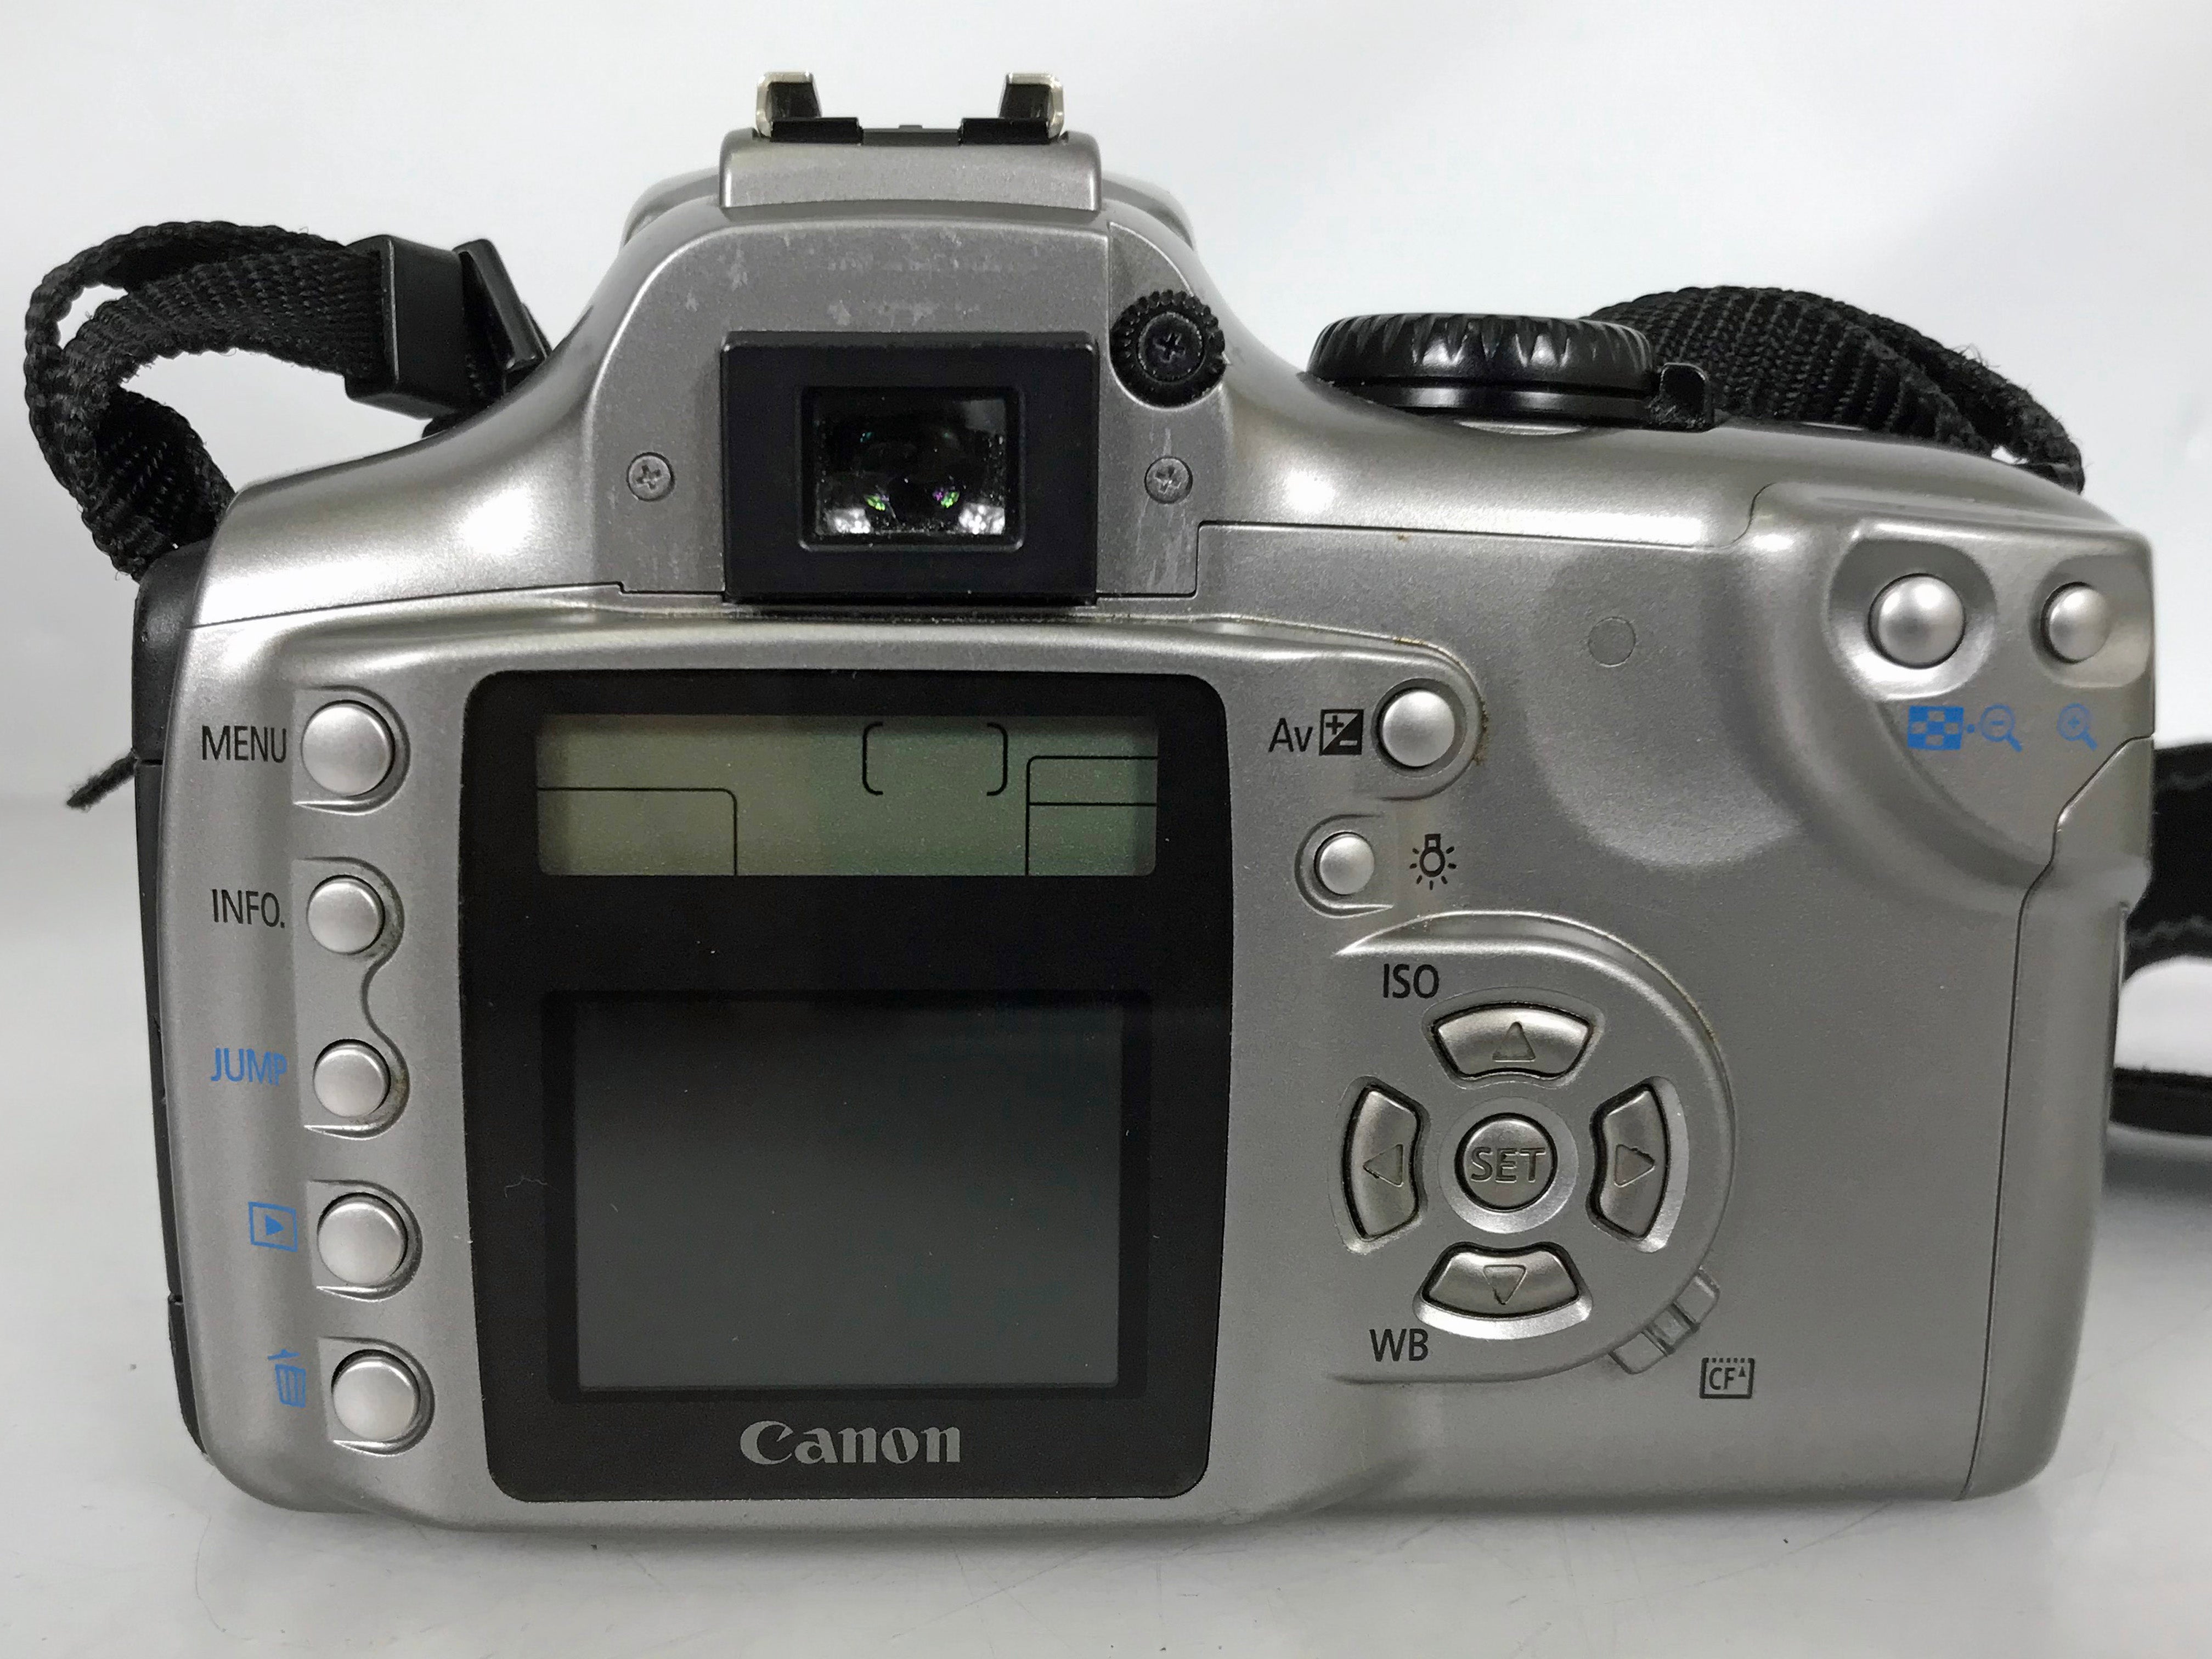 Canon EOS 300D 6.3MP Digital SLR Camera w/ Carrying Case, Canon 75-300mm Zoom Lens, Battery Charger